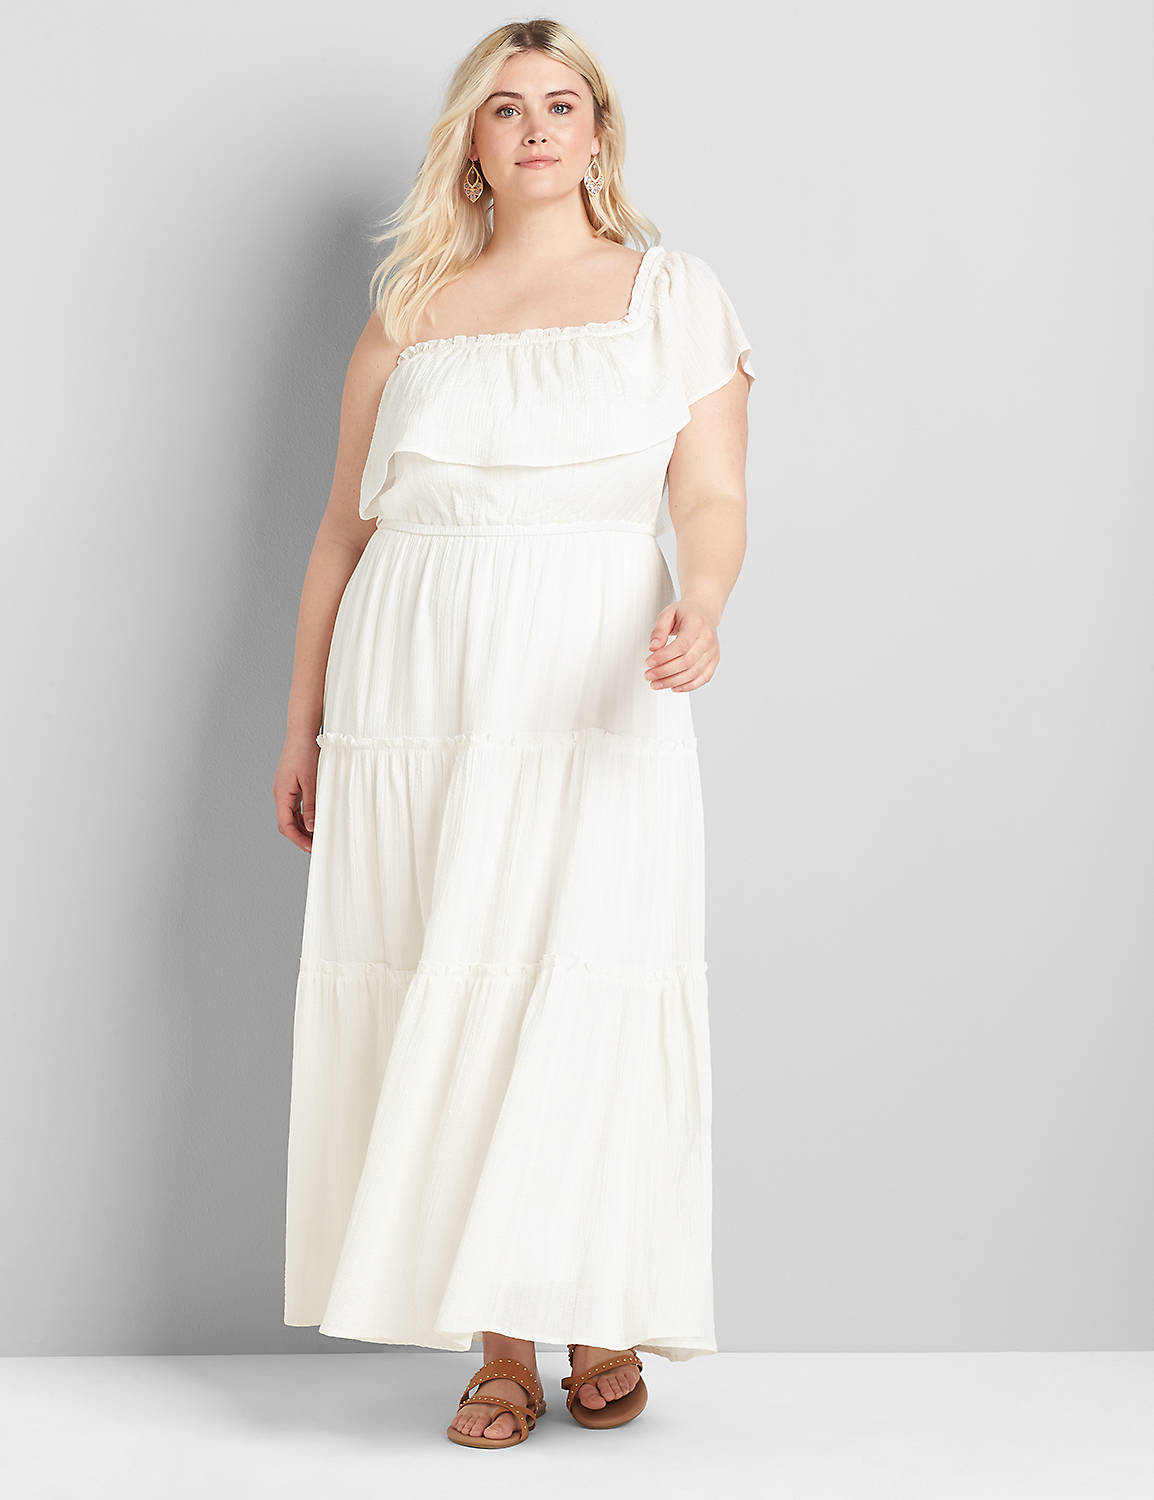 Short Sleeve Off The Shoulder Tiered Maxi 1120640:Ascena White:22/24 PETITE Product Image 4